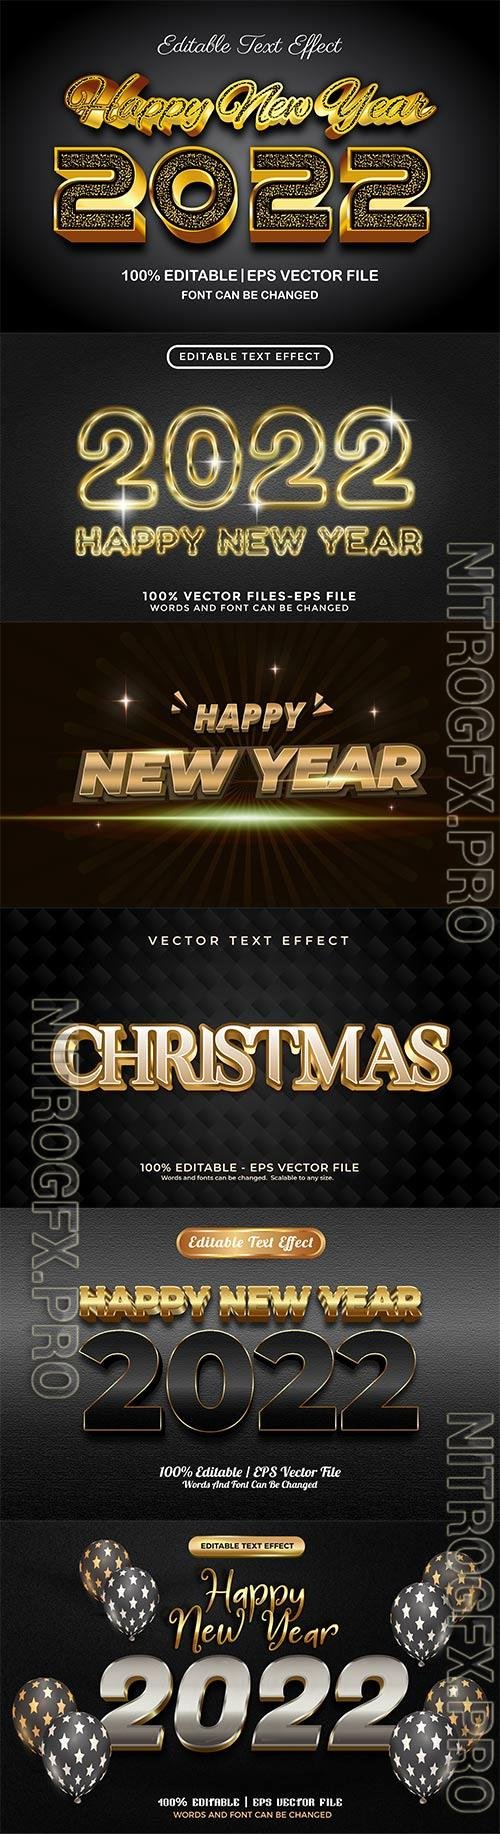 2022 New year and christmas editable text effect vector vol 29